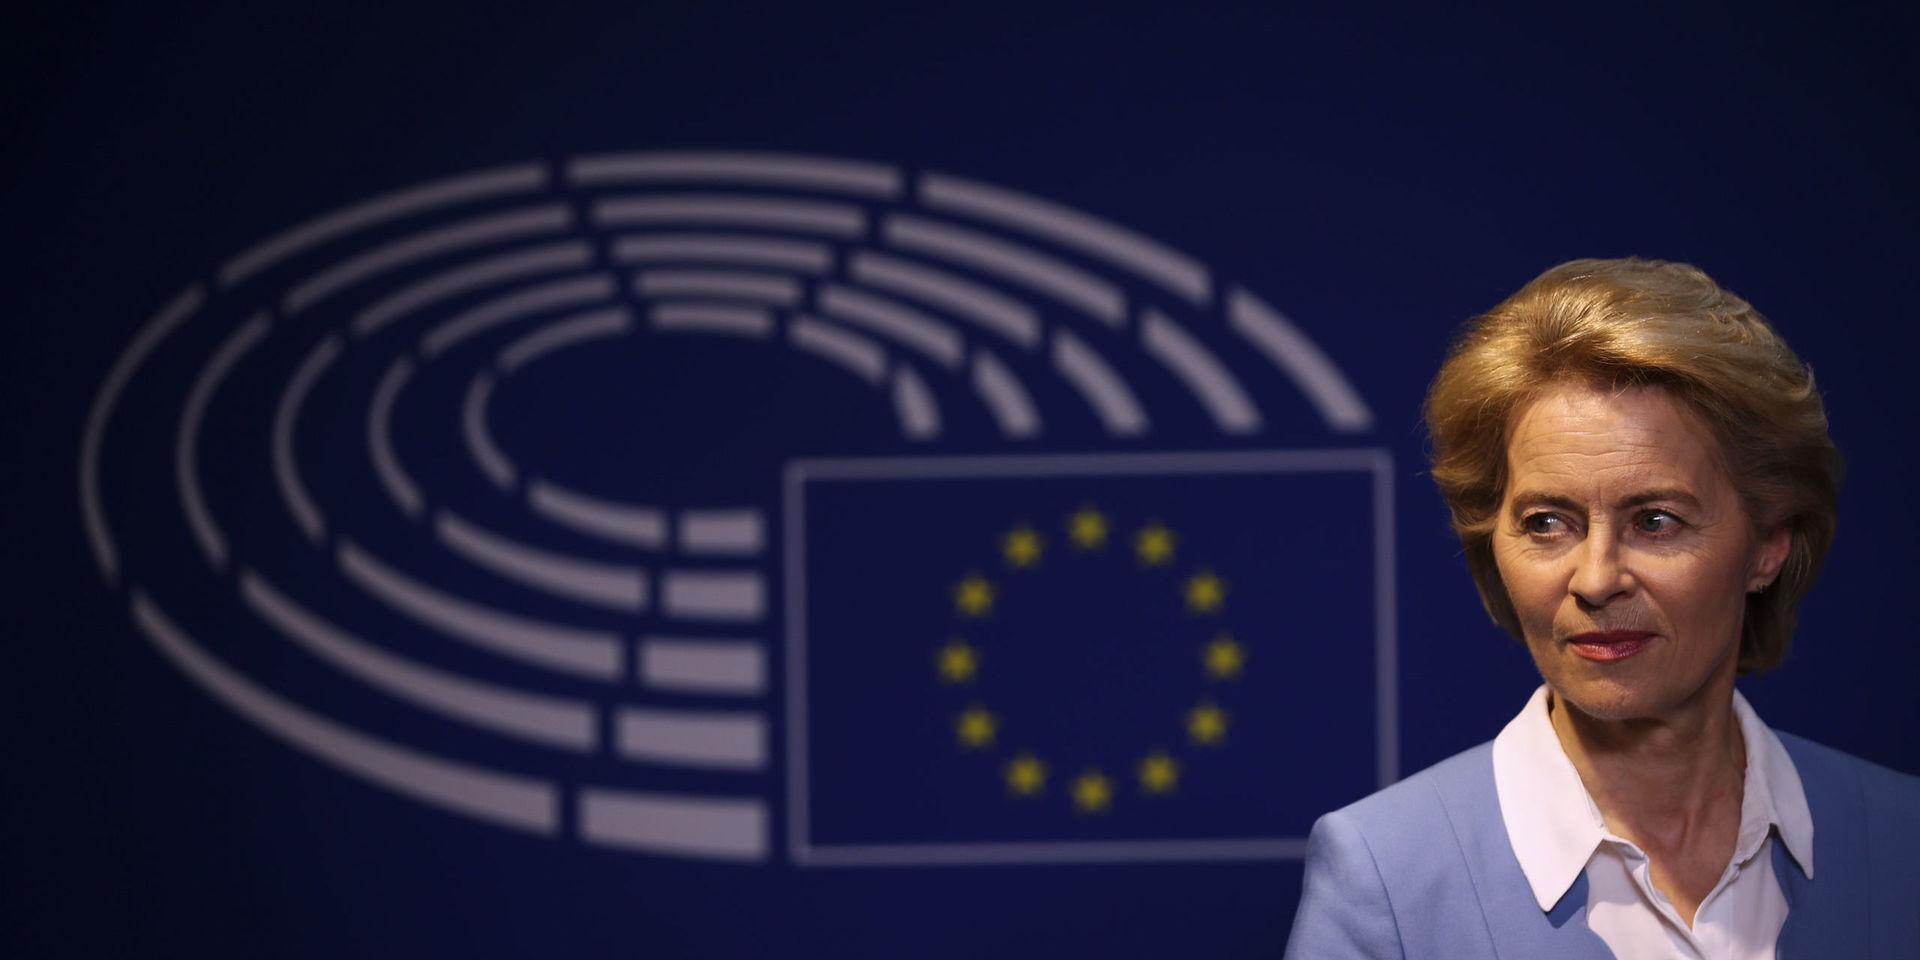 German Defense Minister and candidate for European Commission President Ursula von der Leyen listens to new elected President of the European Parliament David Sassoli during a joint statement after their meeting at the European Parliament in Brussels, Wednesday, July 10, 2019. European Parliament groups are grilling the German candidate for European Commission president before they take a vote on her appointment next week. (AP Photo/Francisco Seco)